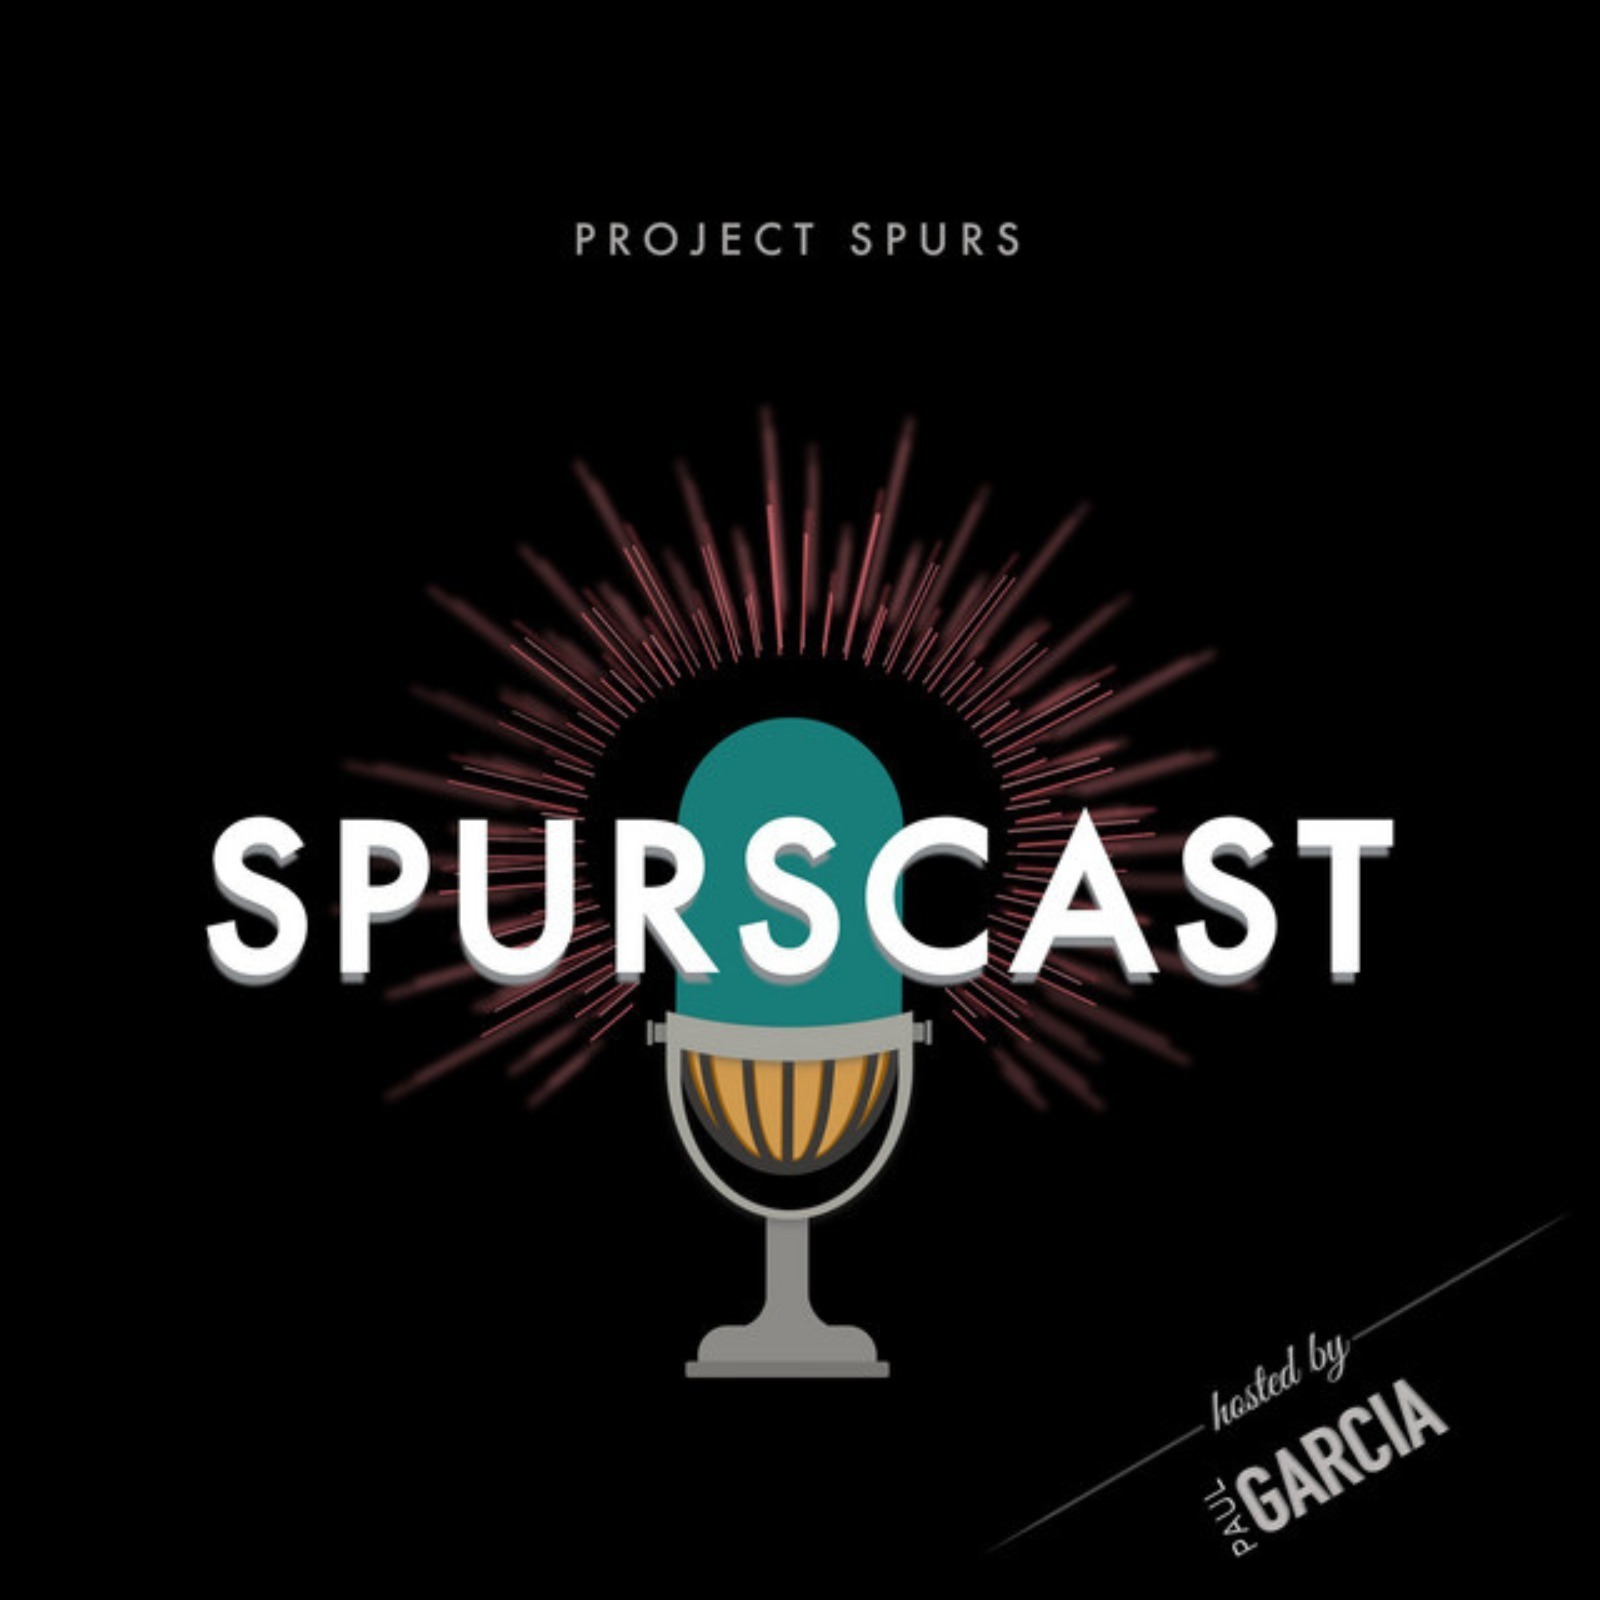 Spurscast Ep. 722: Wemby at the 5 in New Starting Lineup